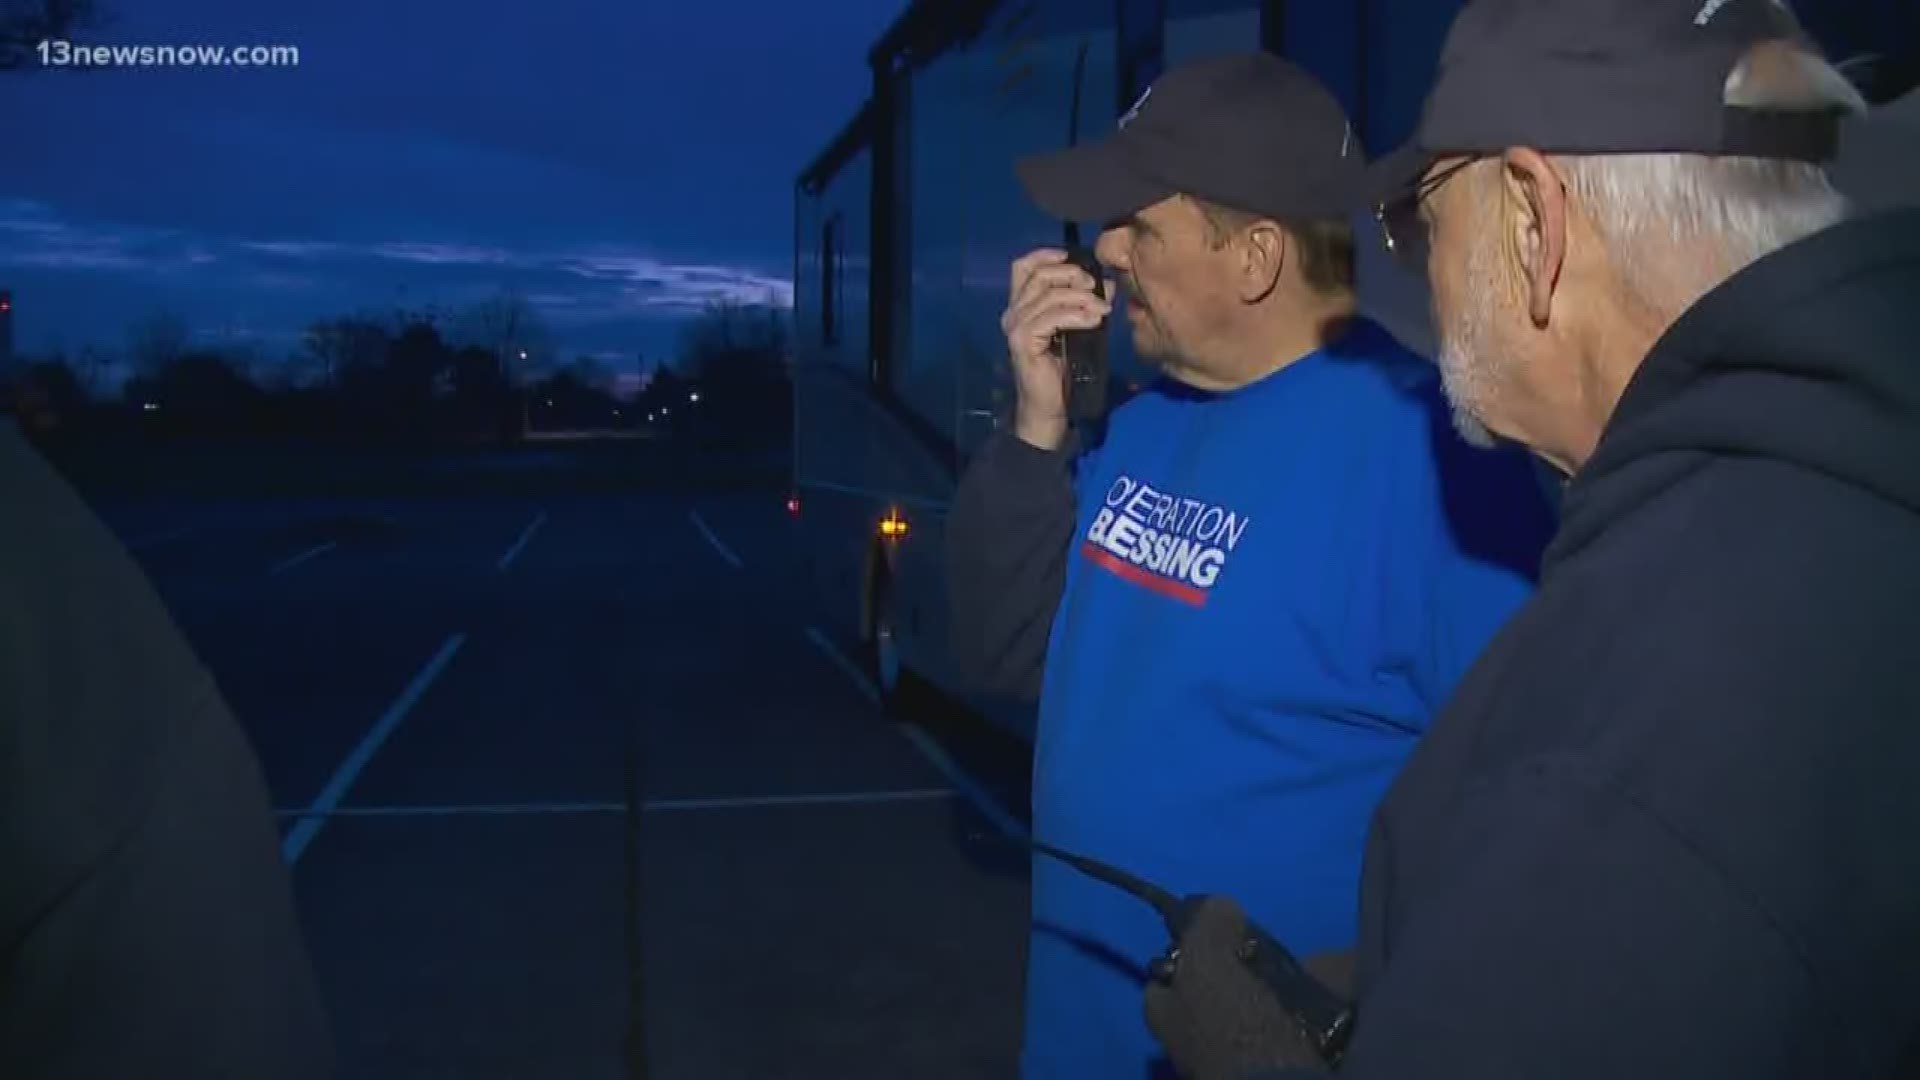 Local volunteers on way to Nebraska to help residents affected by floods.